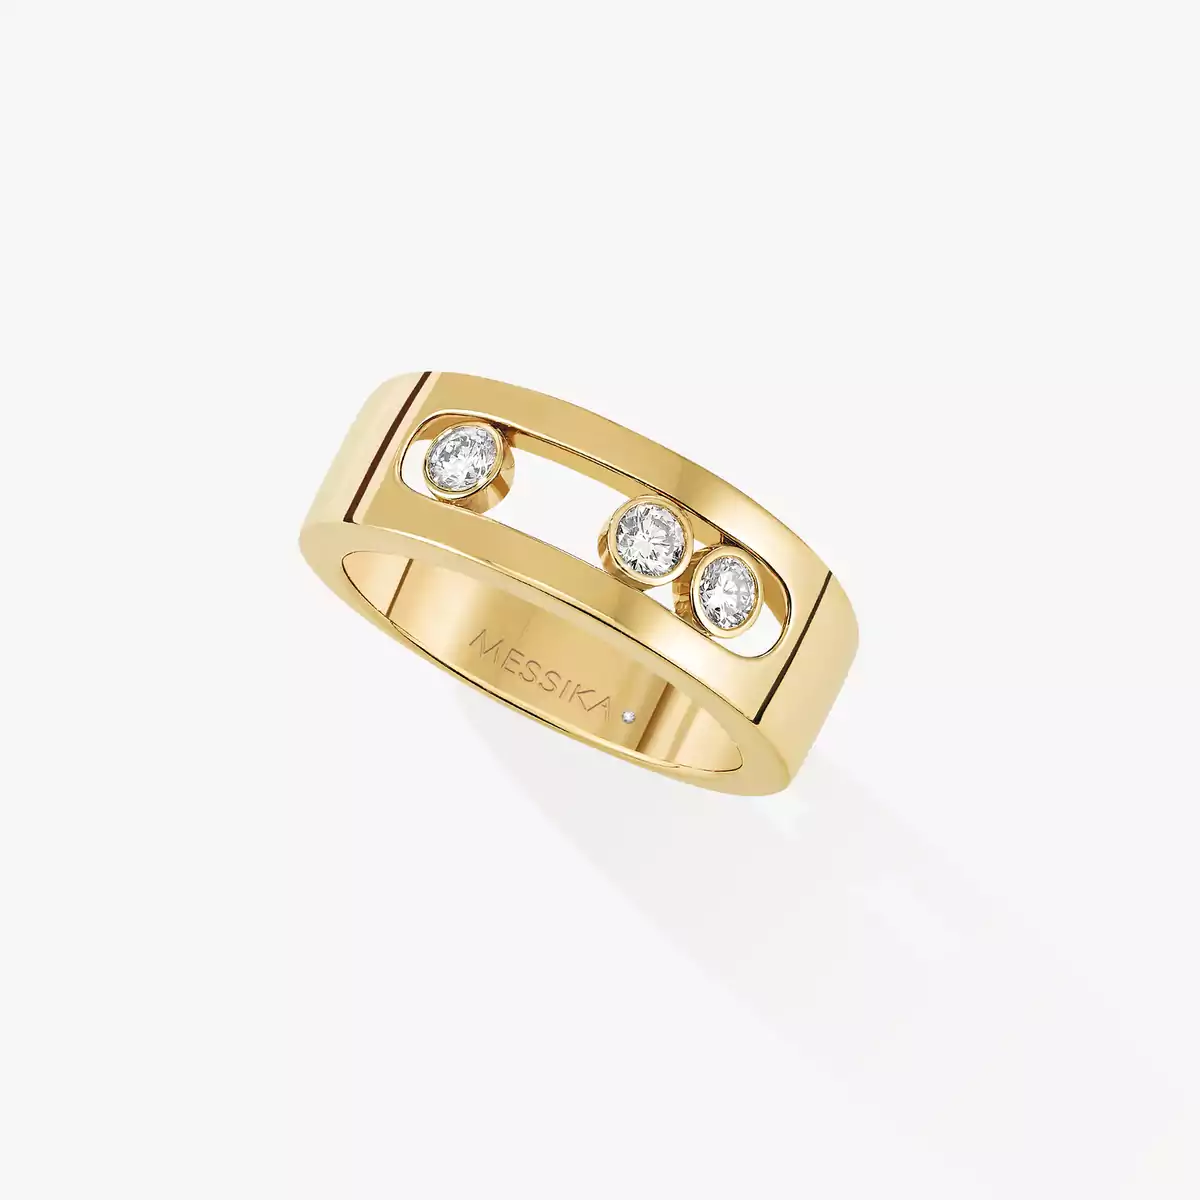 Move Joaillerie SM Yellow Gold For Her Diamond Ring 04704-YG